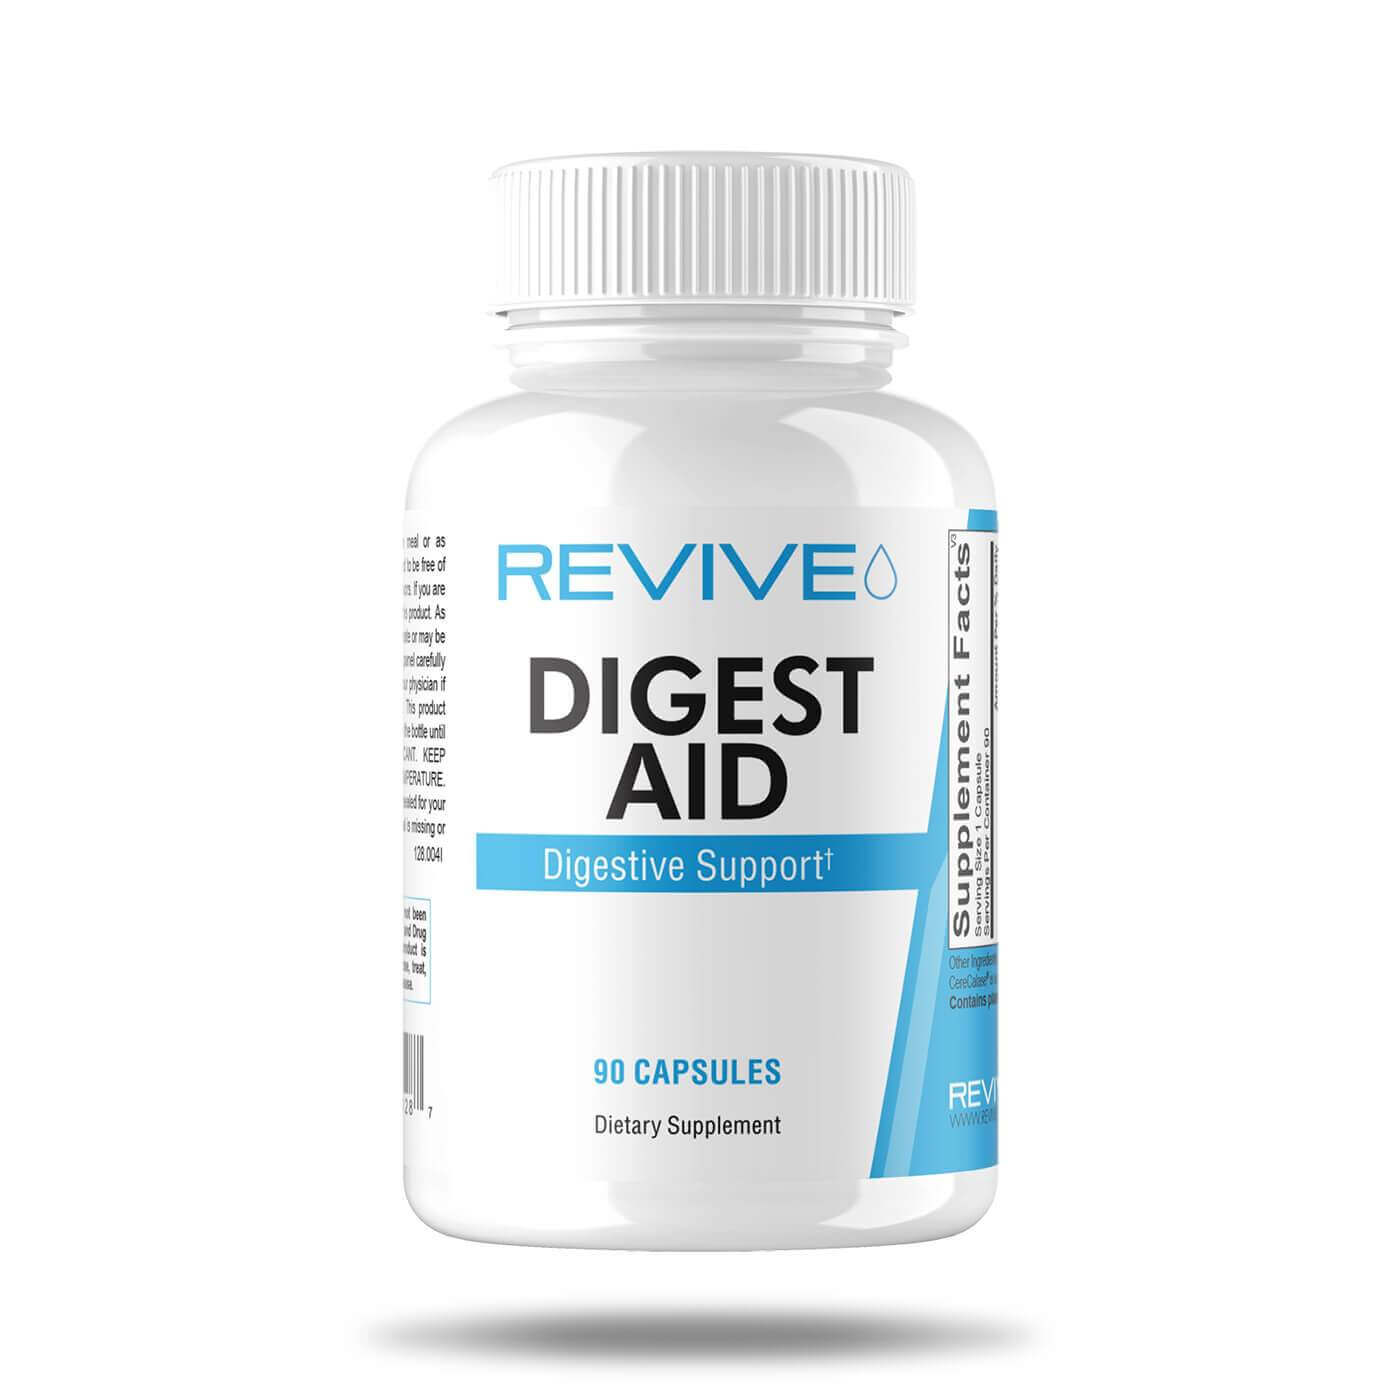 Revive MD Digest